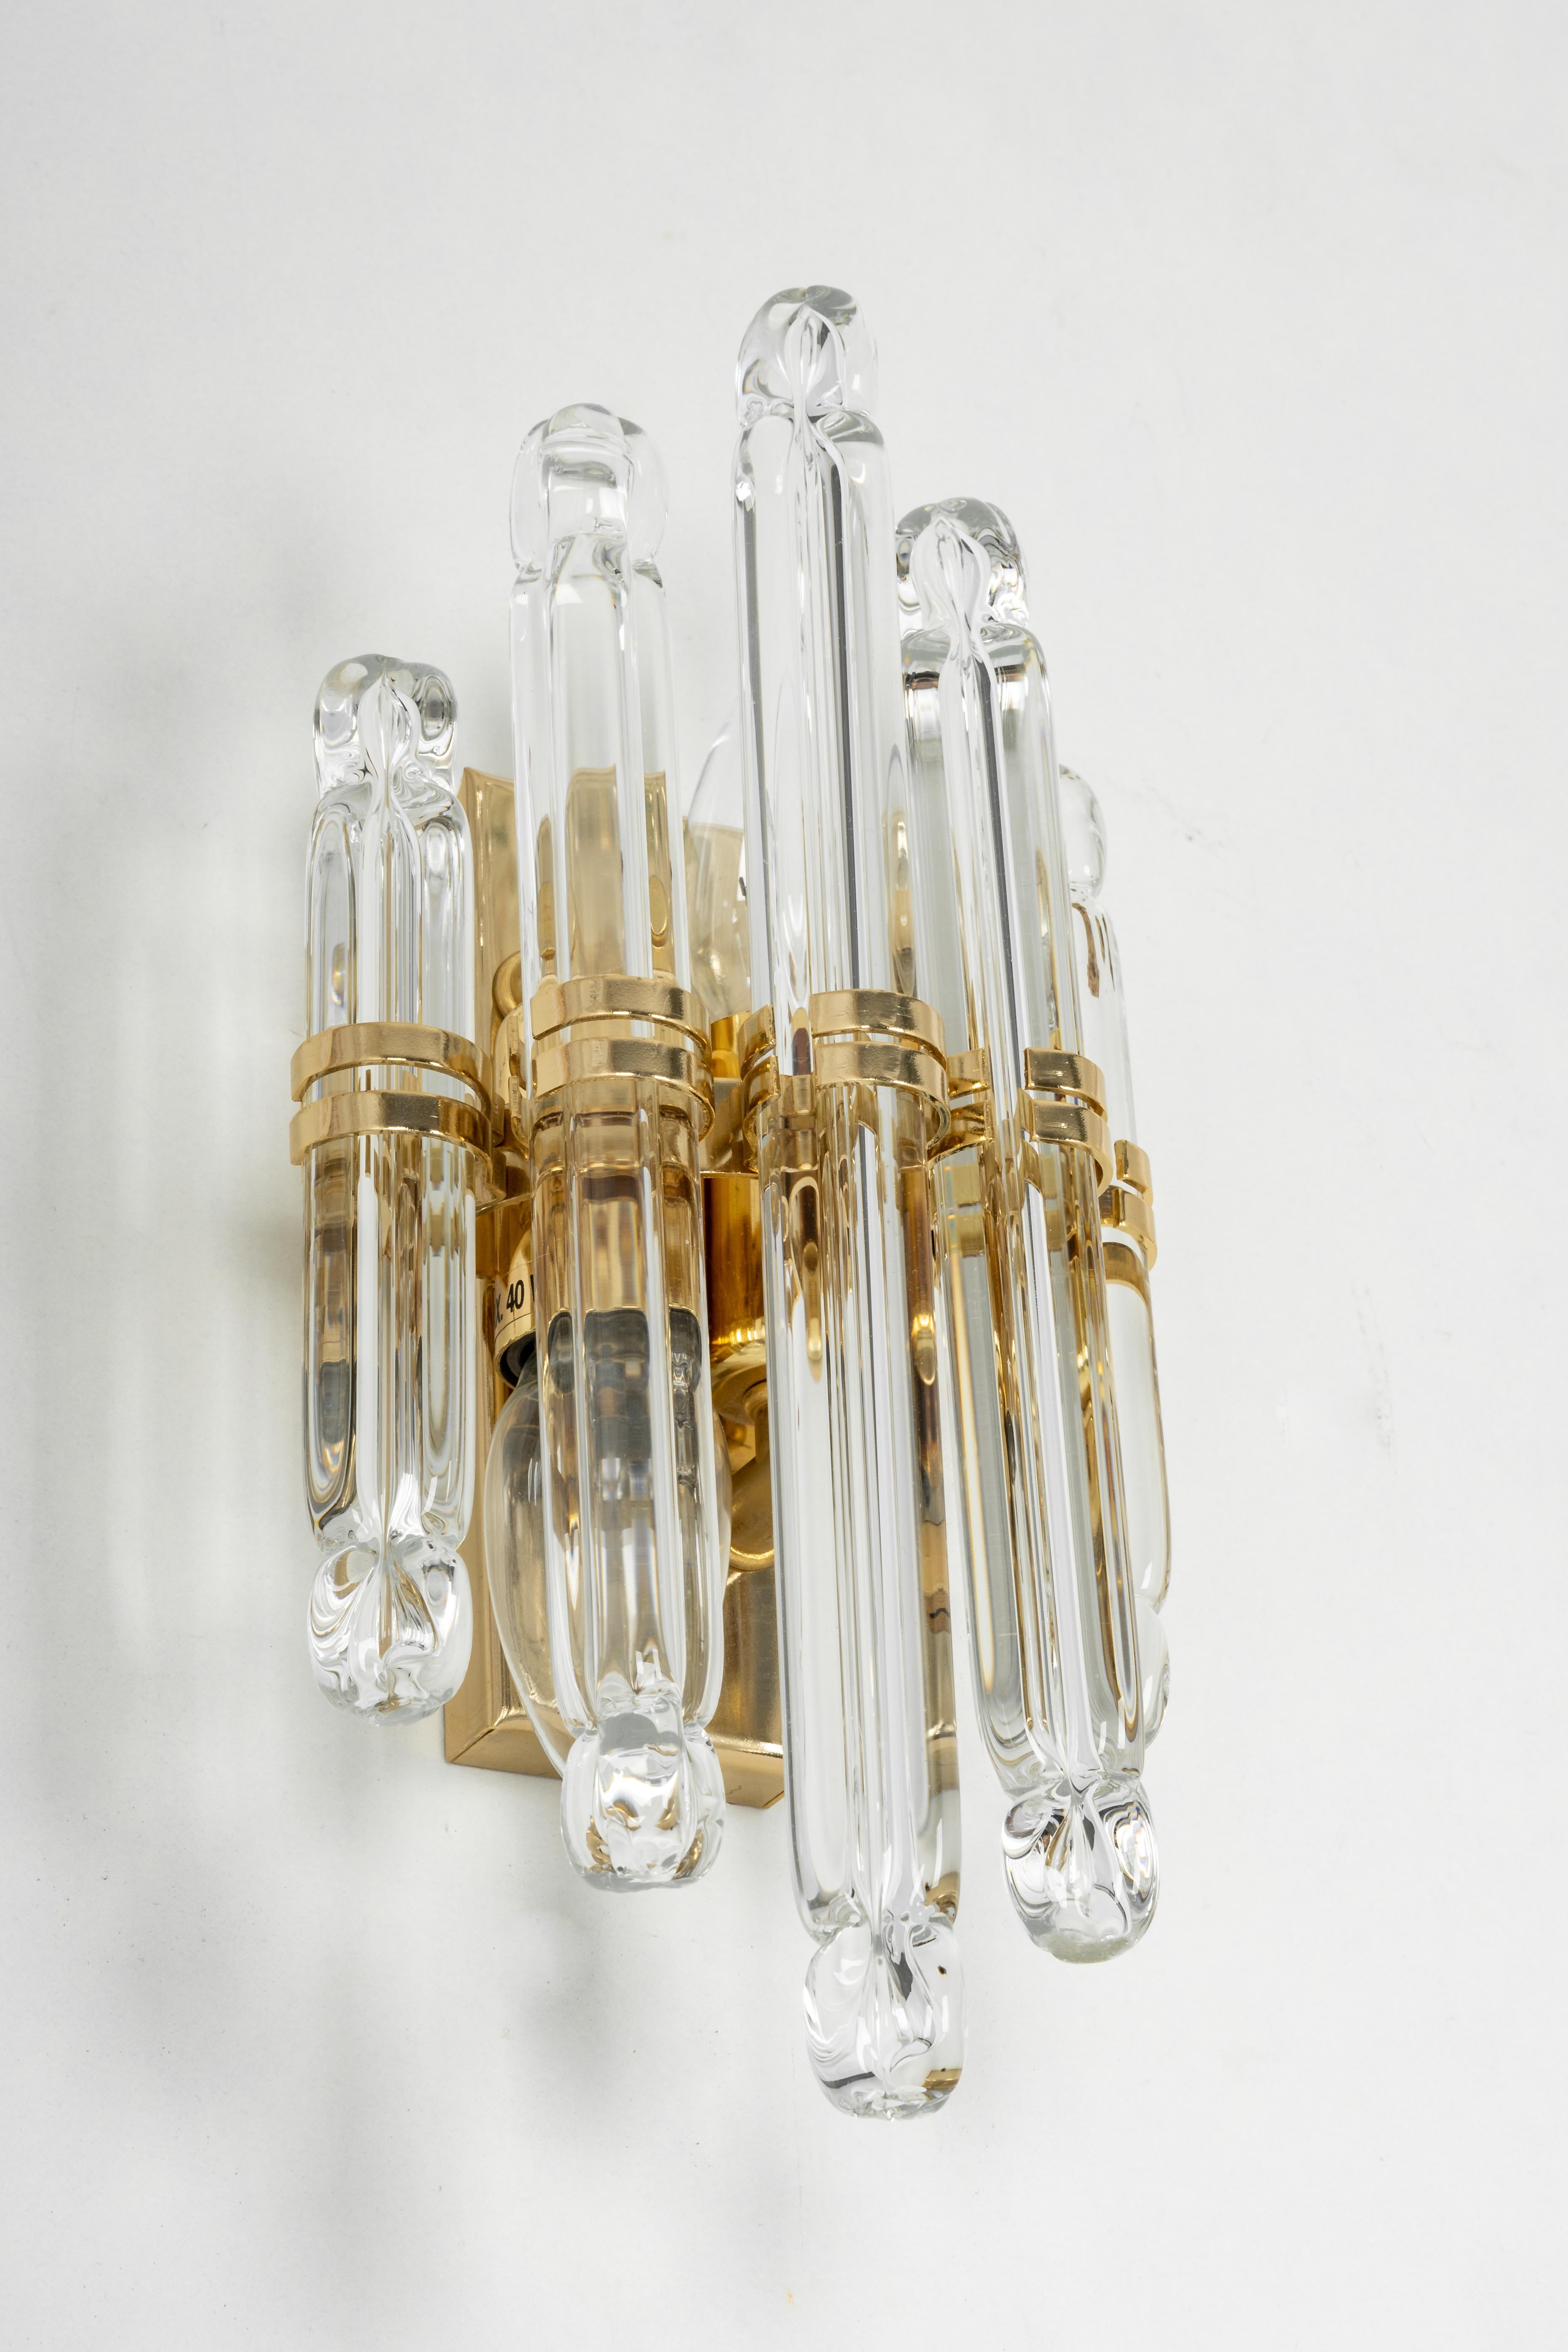 Beautiful wall light with 5 crystal glasses on a gilt brass frame-design in Venini style, Italy. Manufactured circa 1970s.
High quality and in very good condition. Cleaned, well-wired and ready to use. 

Each fixture requires 2 small bulbs